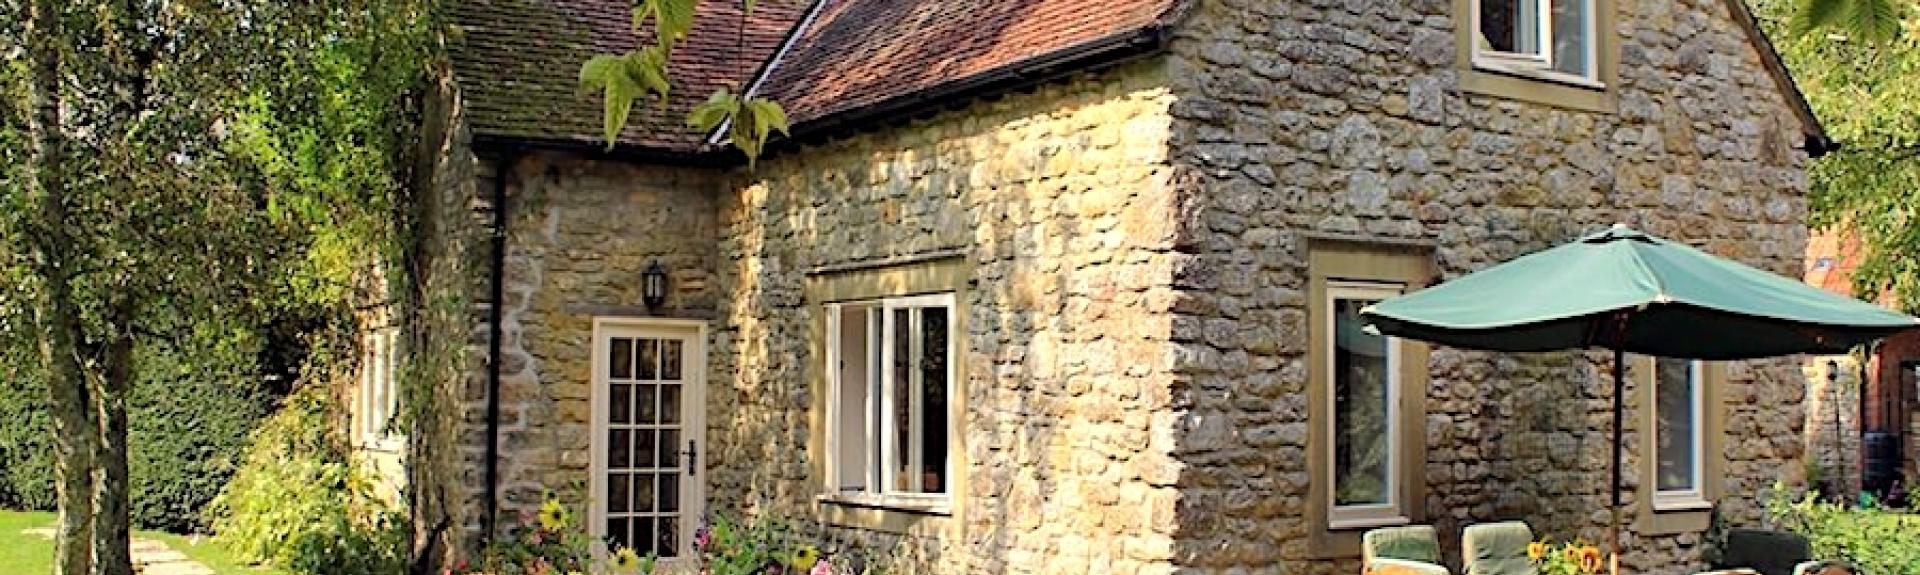 Stone-built Dorset farm cottage with a patio, lawns and mature trees.